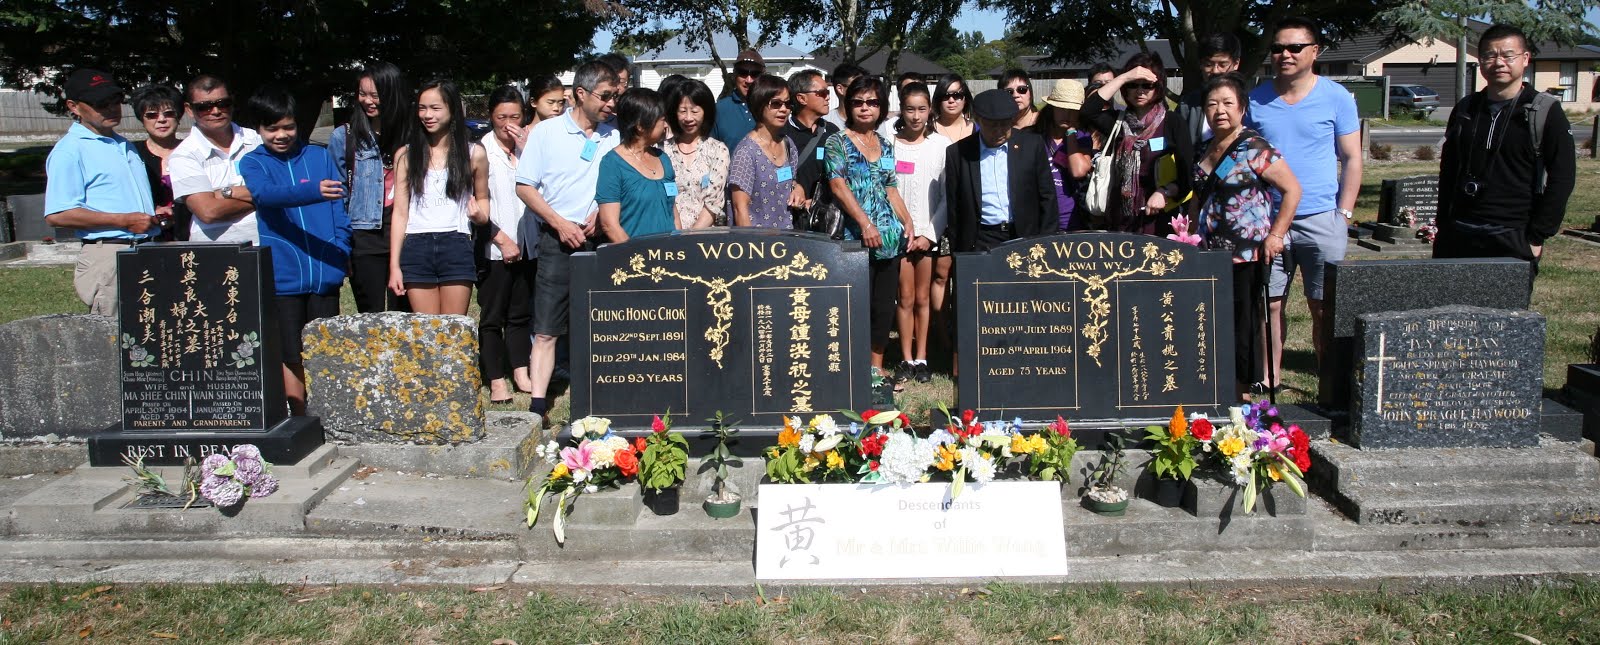 Willie Wong Family at the Cemetery